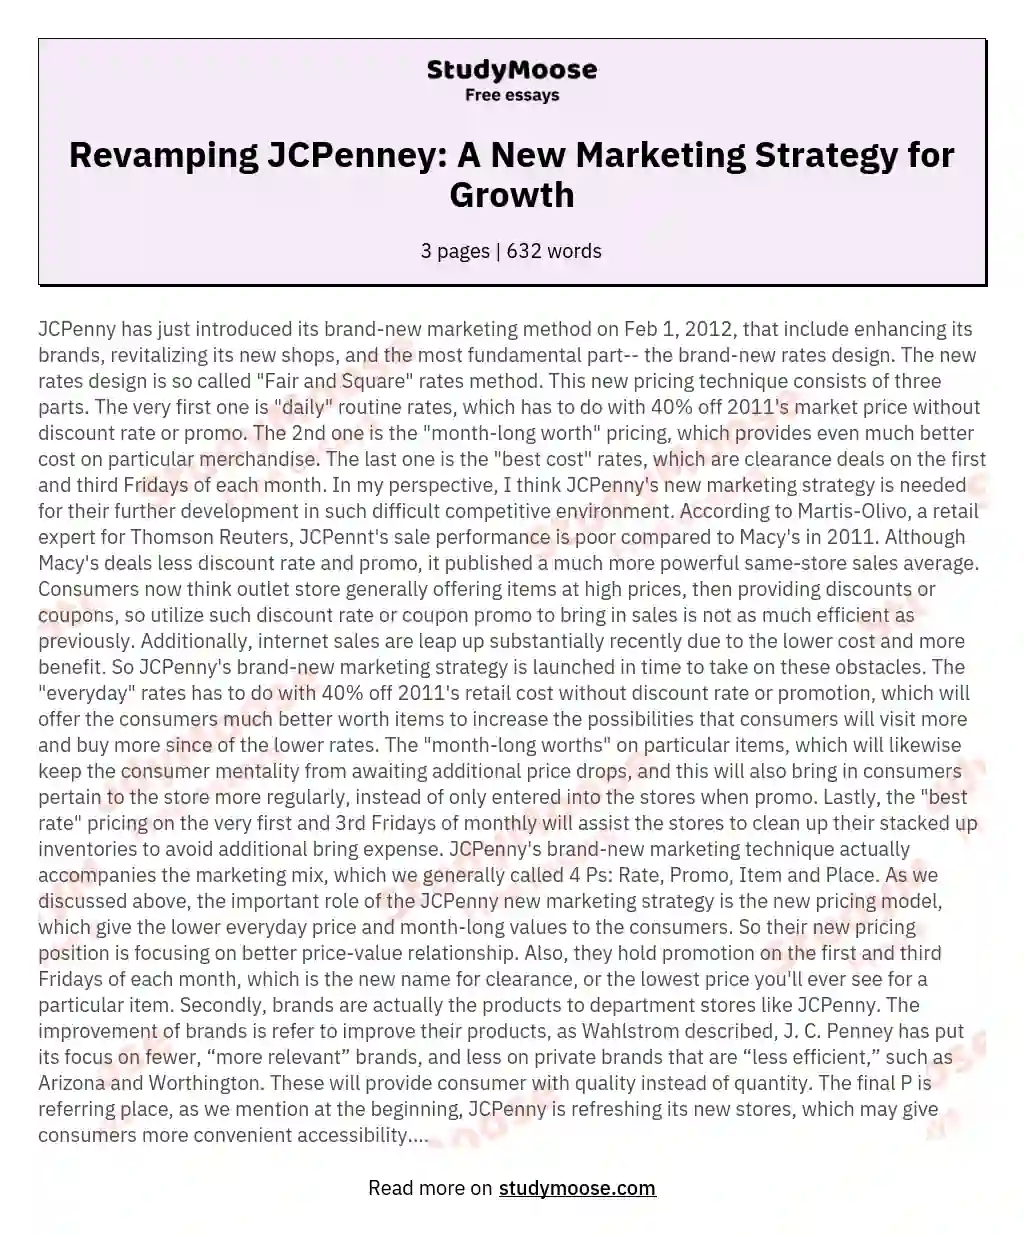 Revamping JCPenney: A New Marketing Strategy for Growth essay